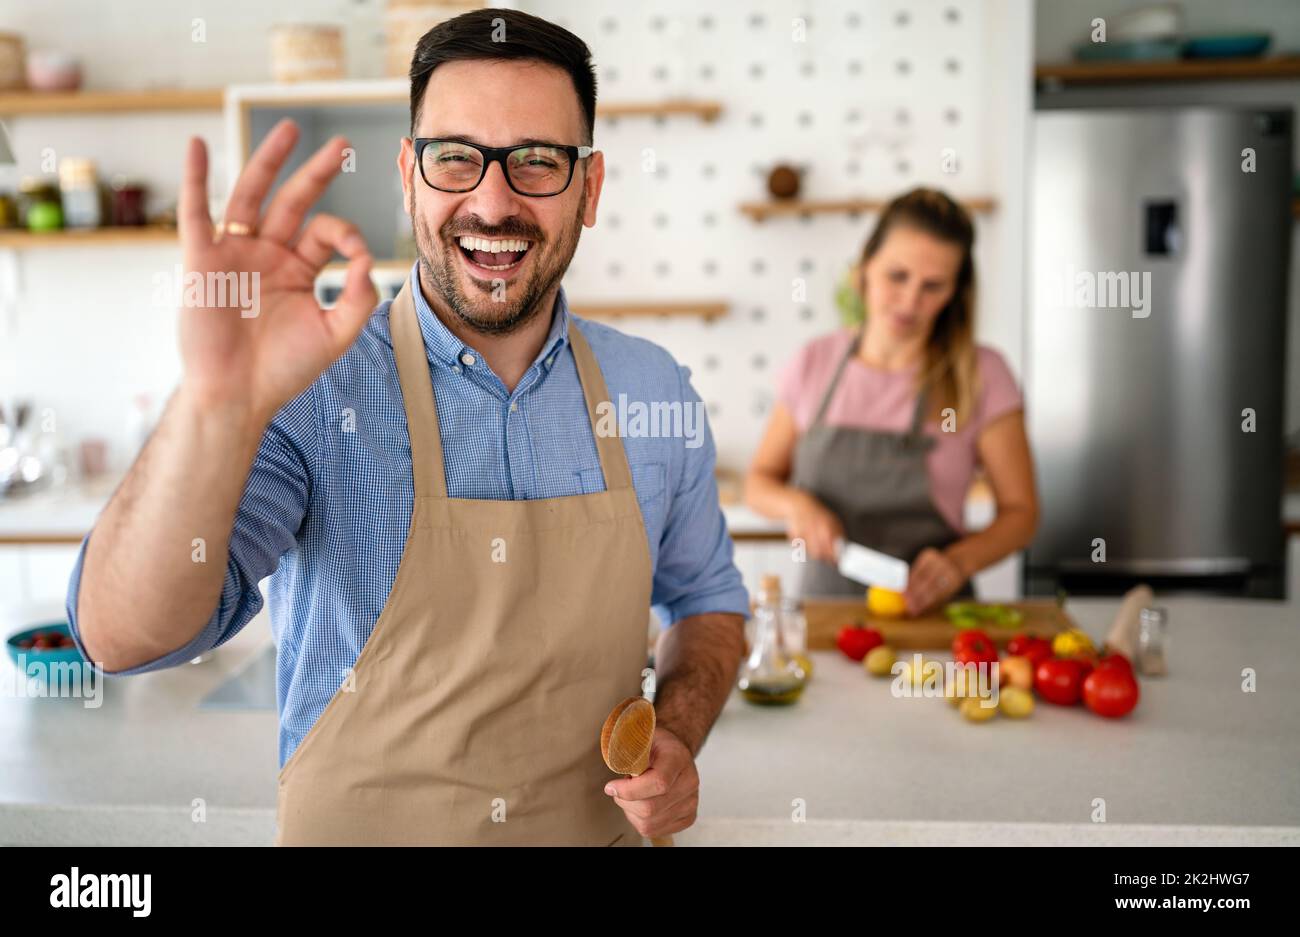 Portrait of handsome happy man cooking at home preparing food in kitchen. Stock Photo